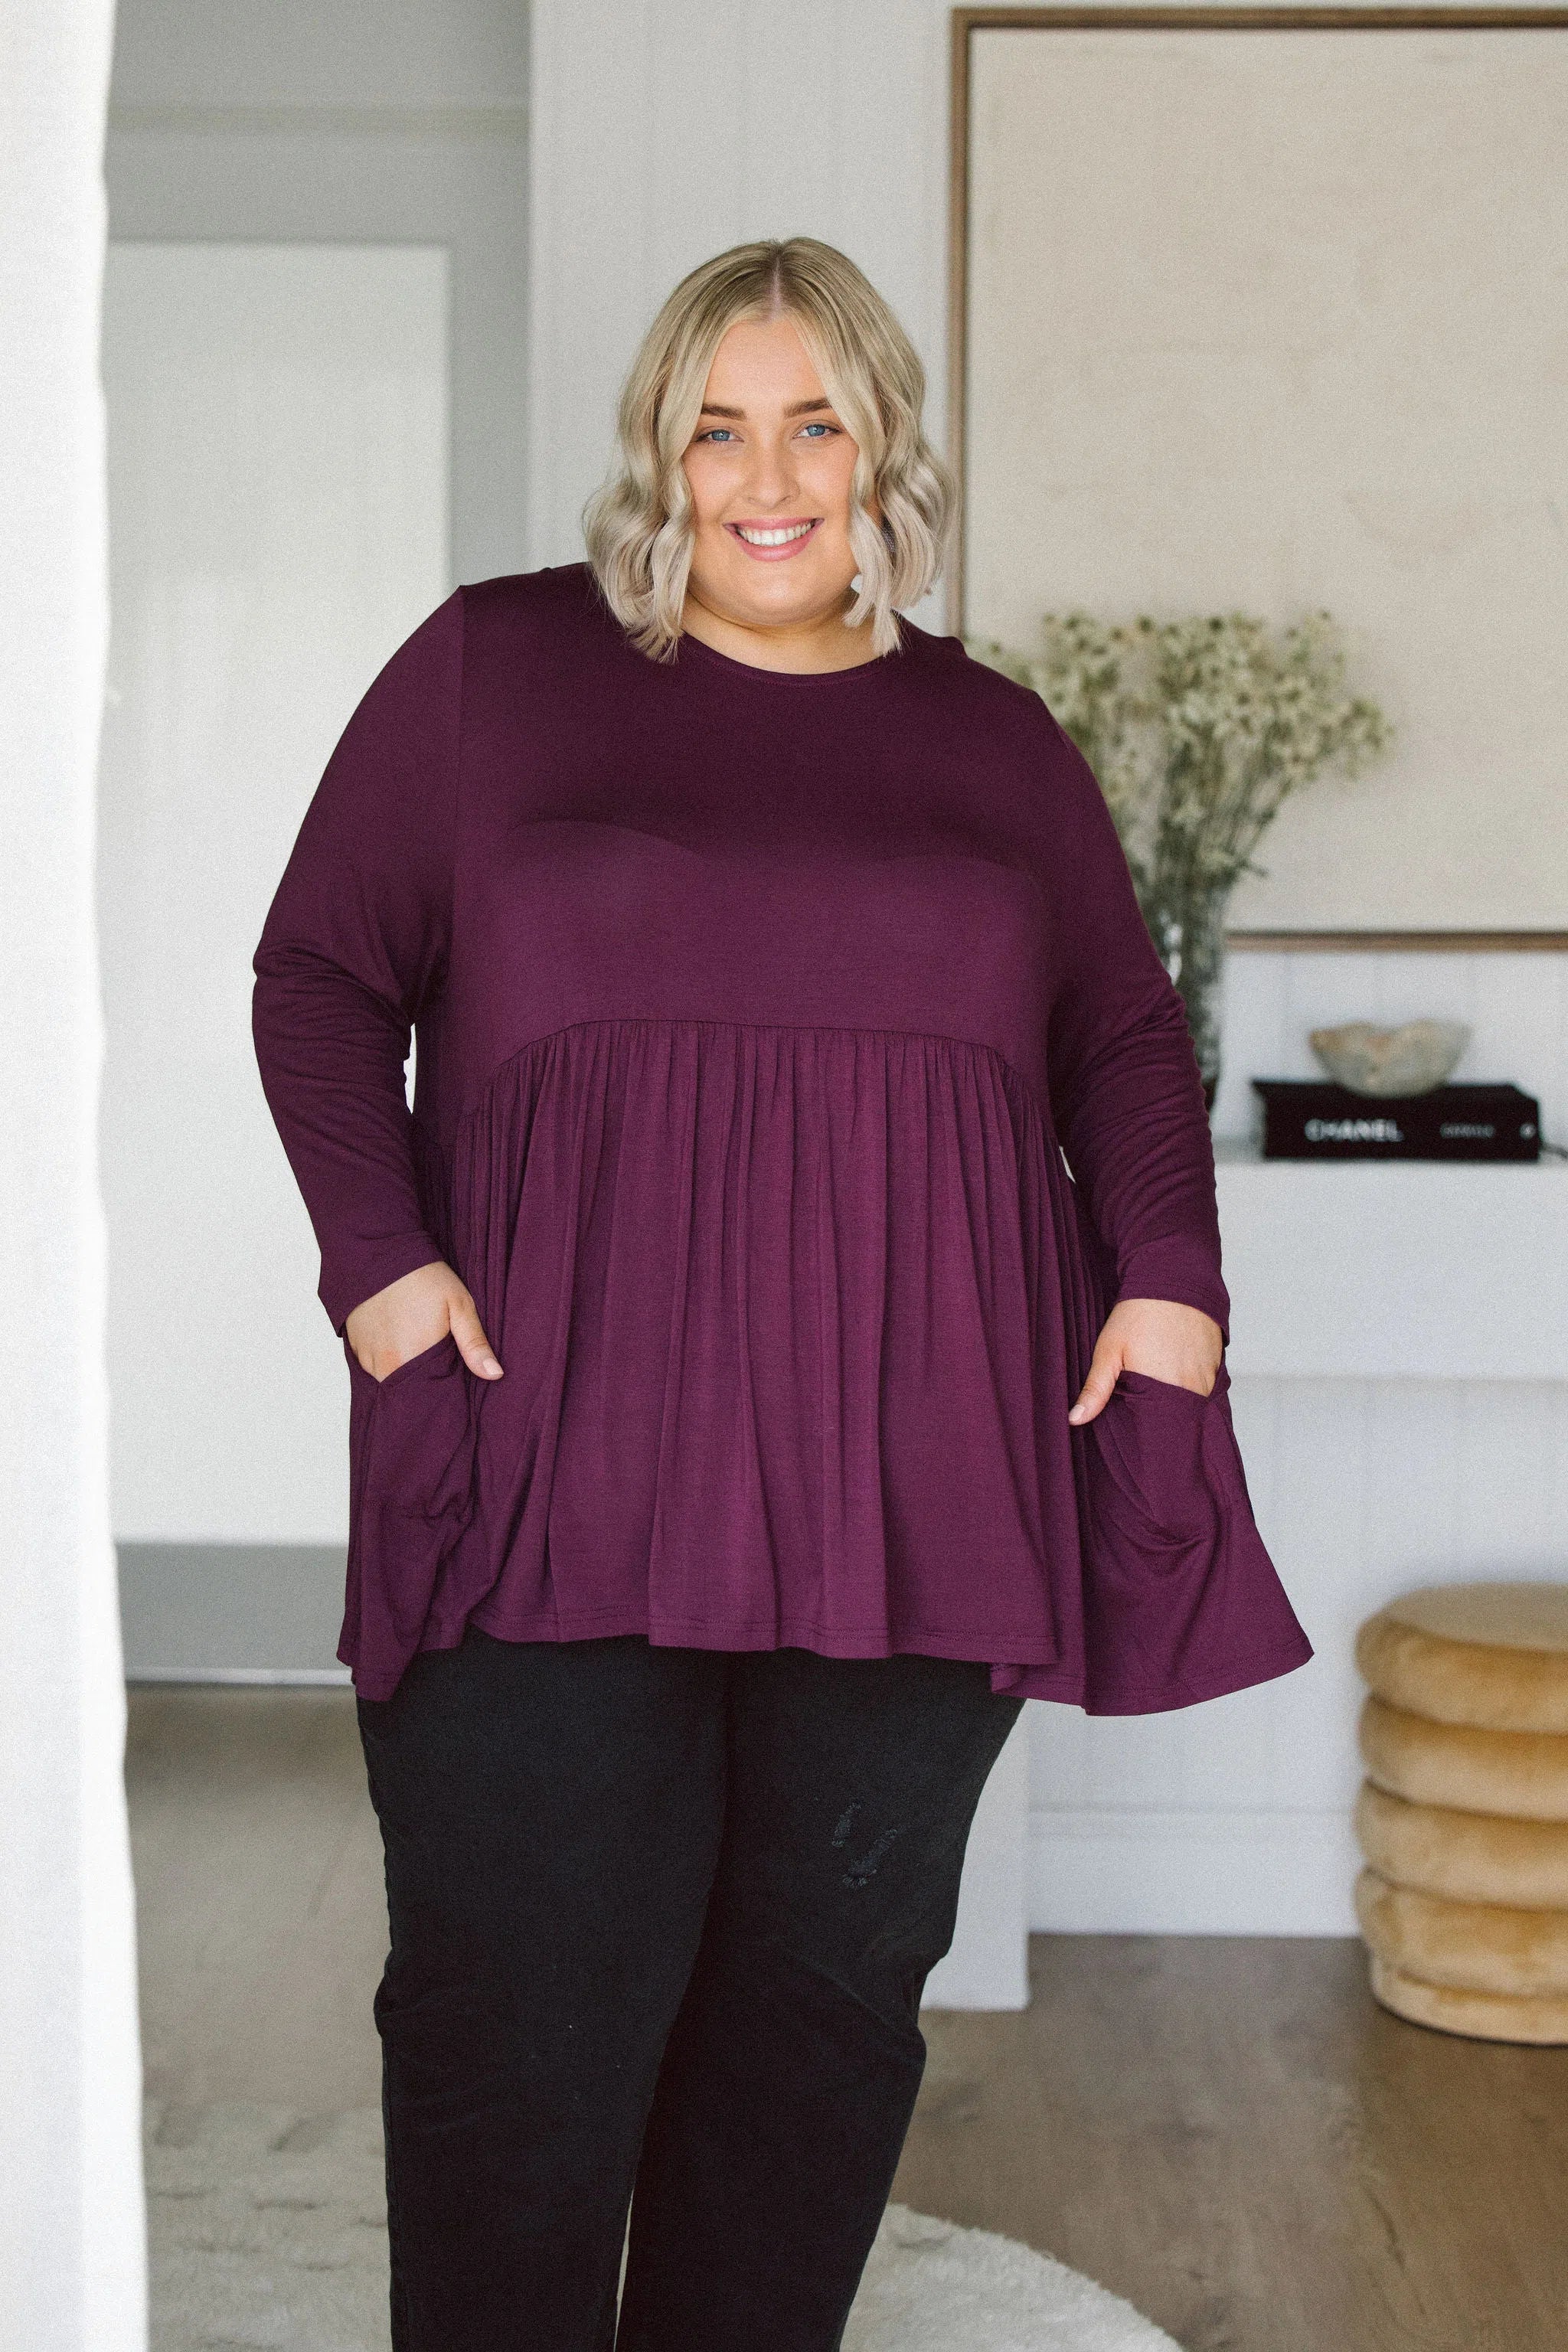 Plus Size clothing,  women modeling a Plus Size Tops, Lucy Long Sleeve Top in Purple berry